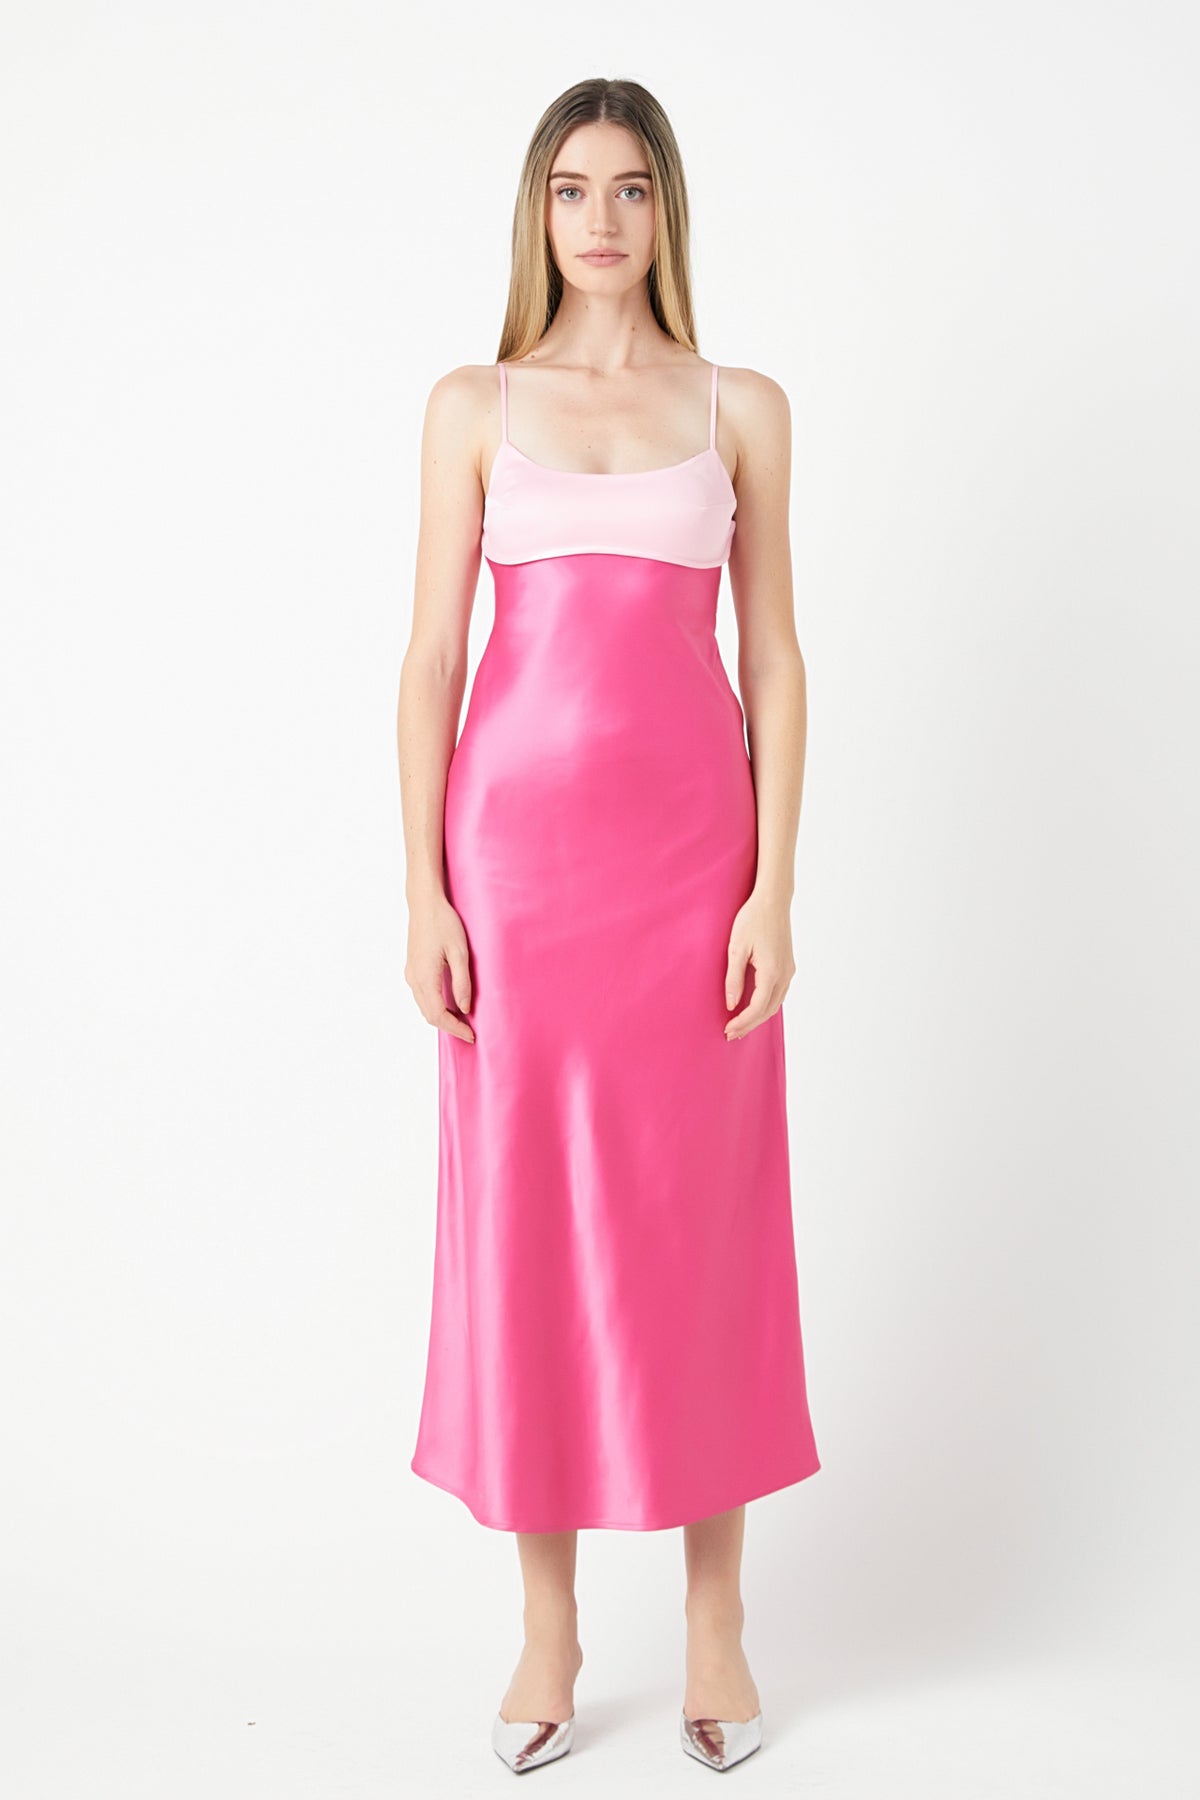 ENDLESS ROSE - Colorblock Satin Maxi Dress - DRESSES available at Objectrare